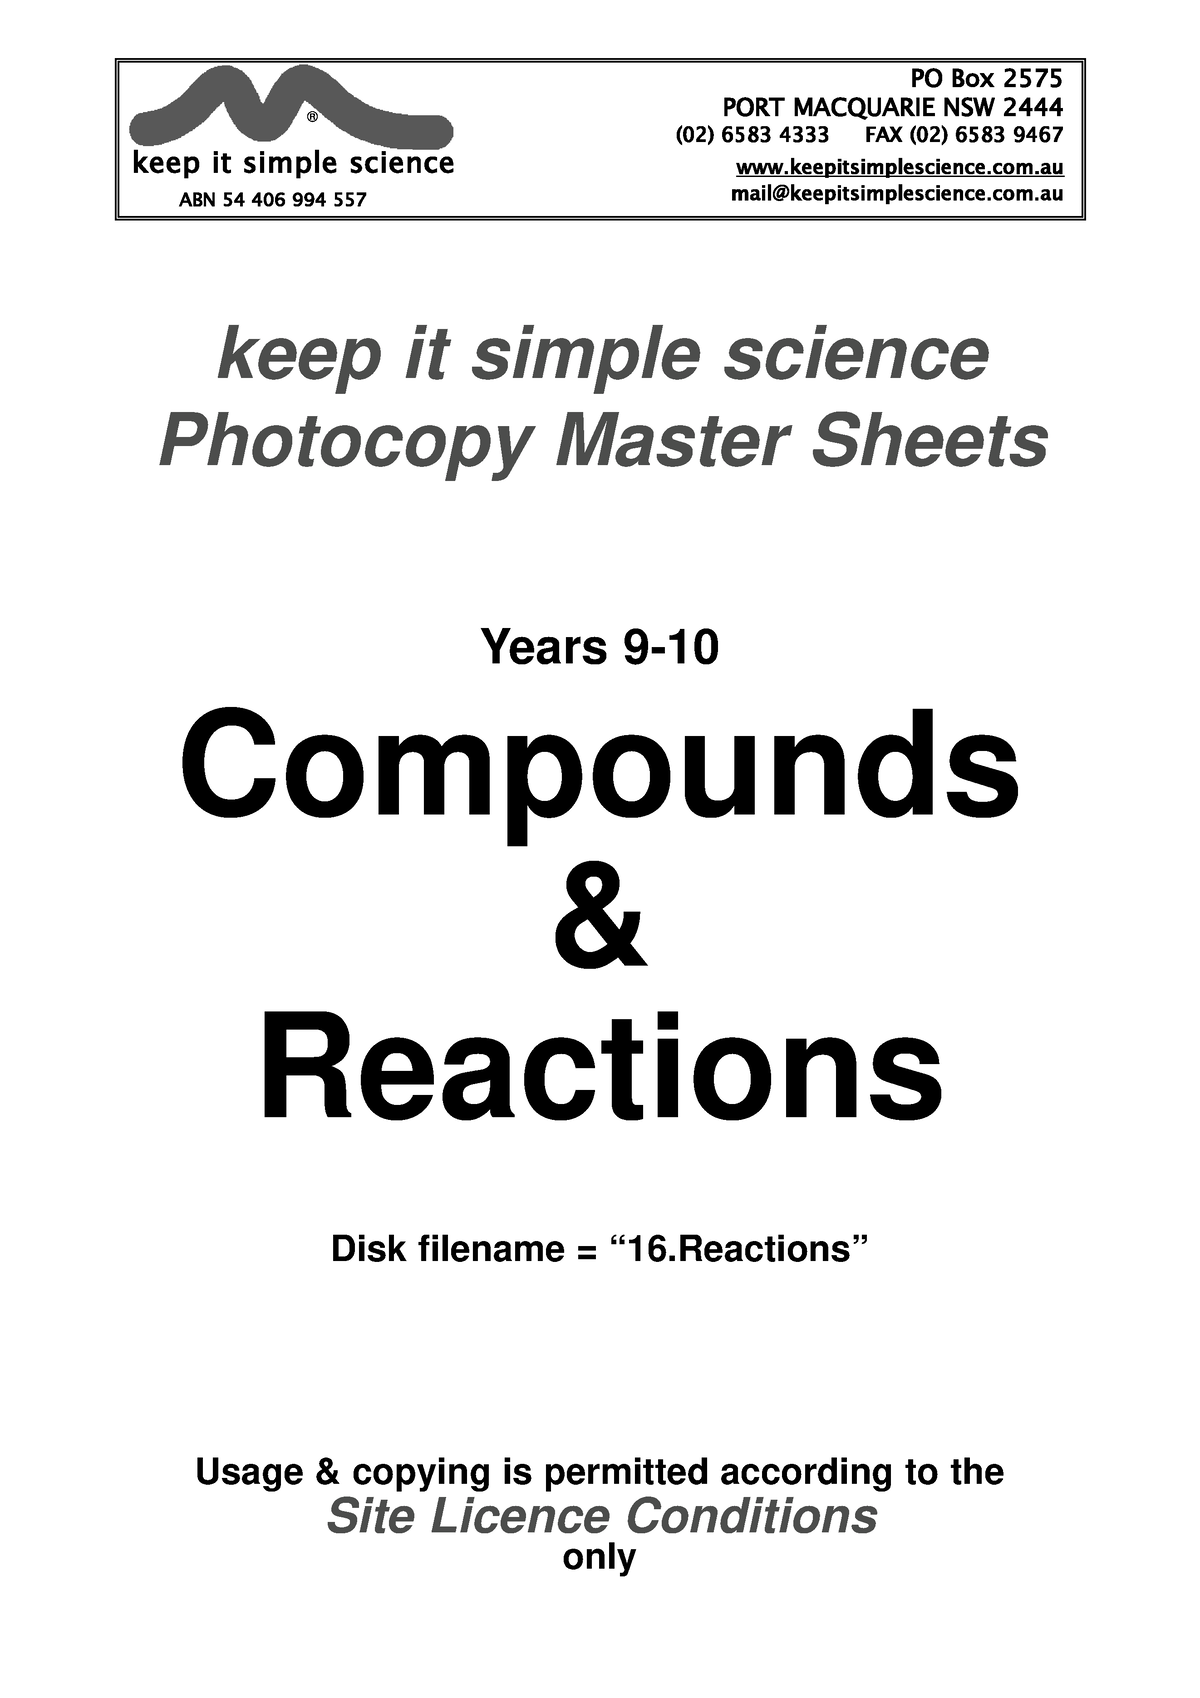 16-ssss-keep-it-simple-science-photocopy-master-sheets-years-9